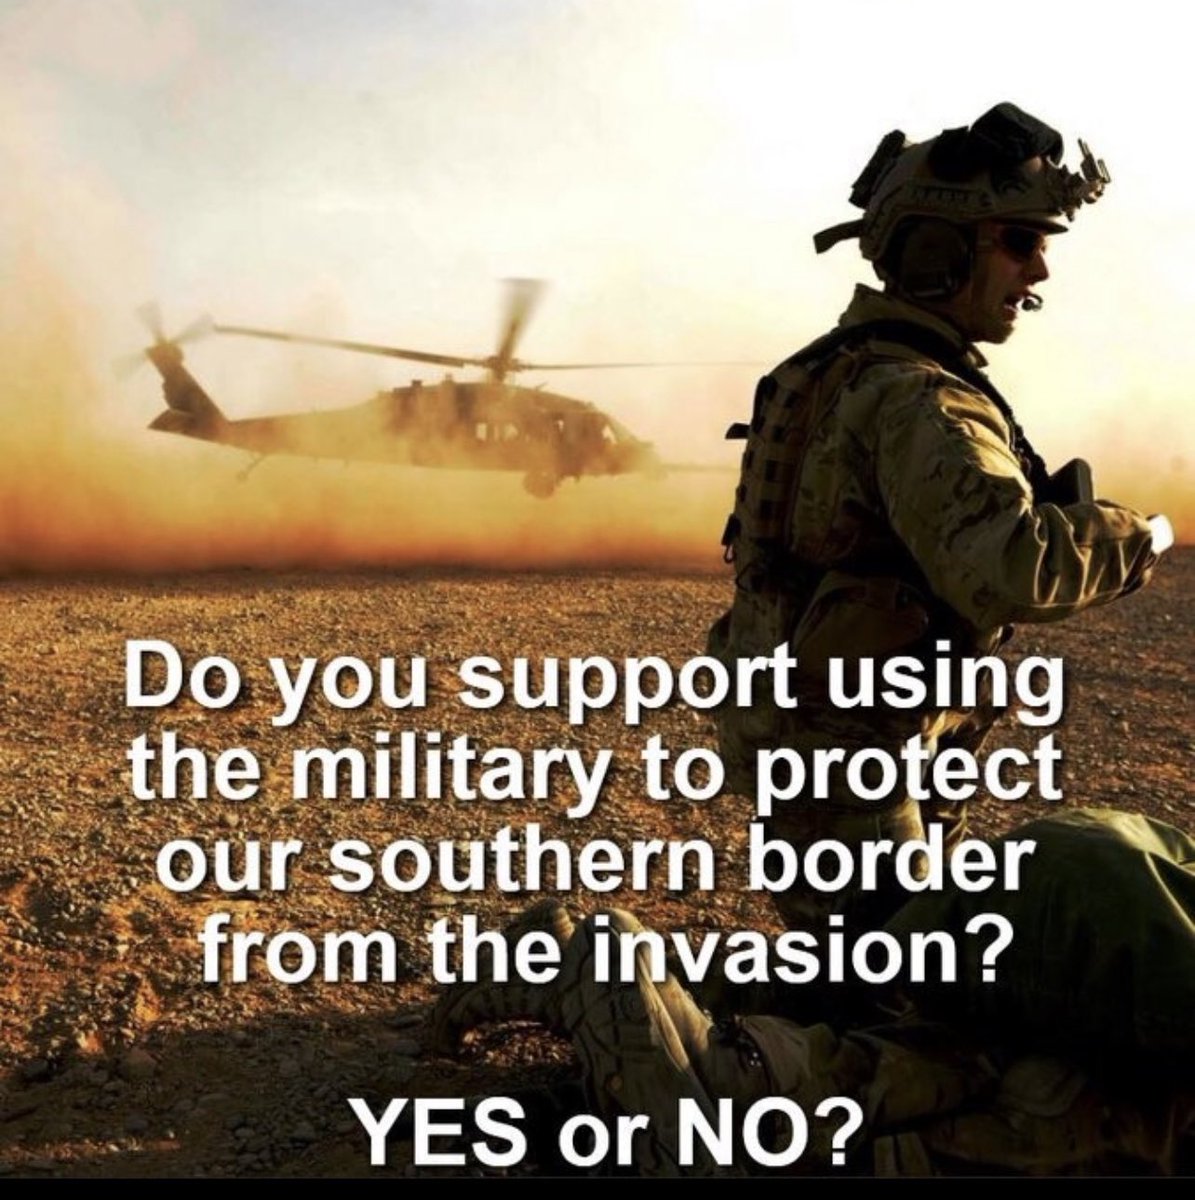 Yes or no? Military force or not?